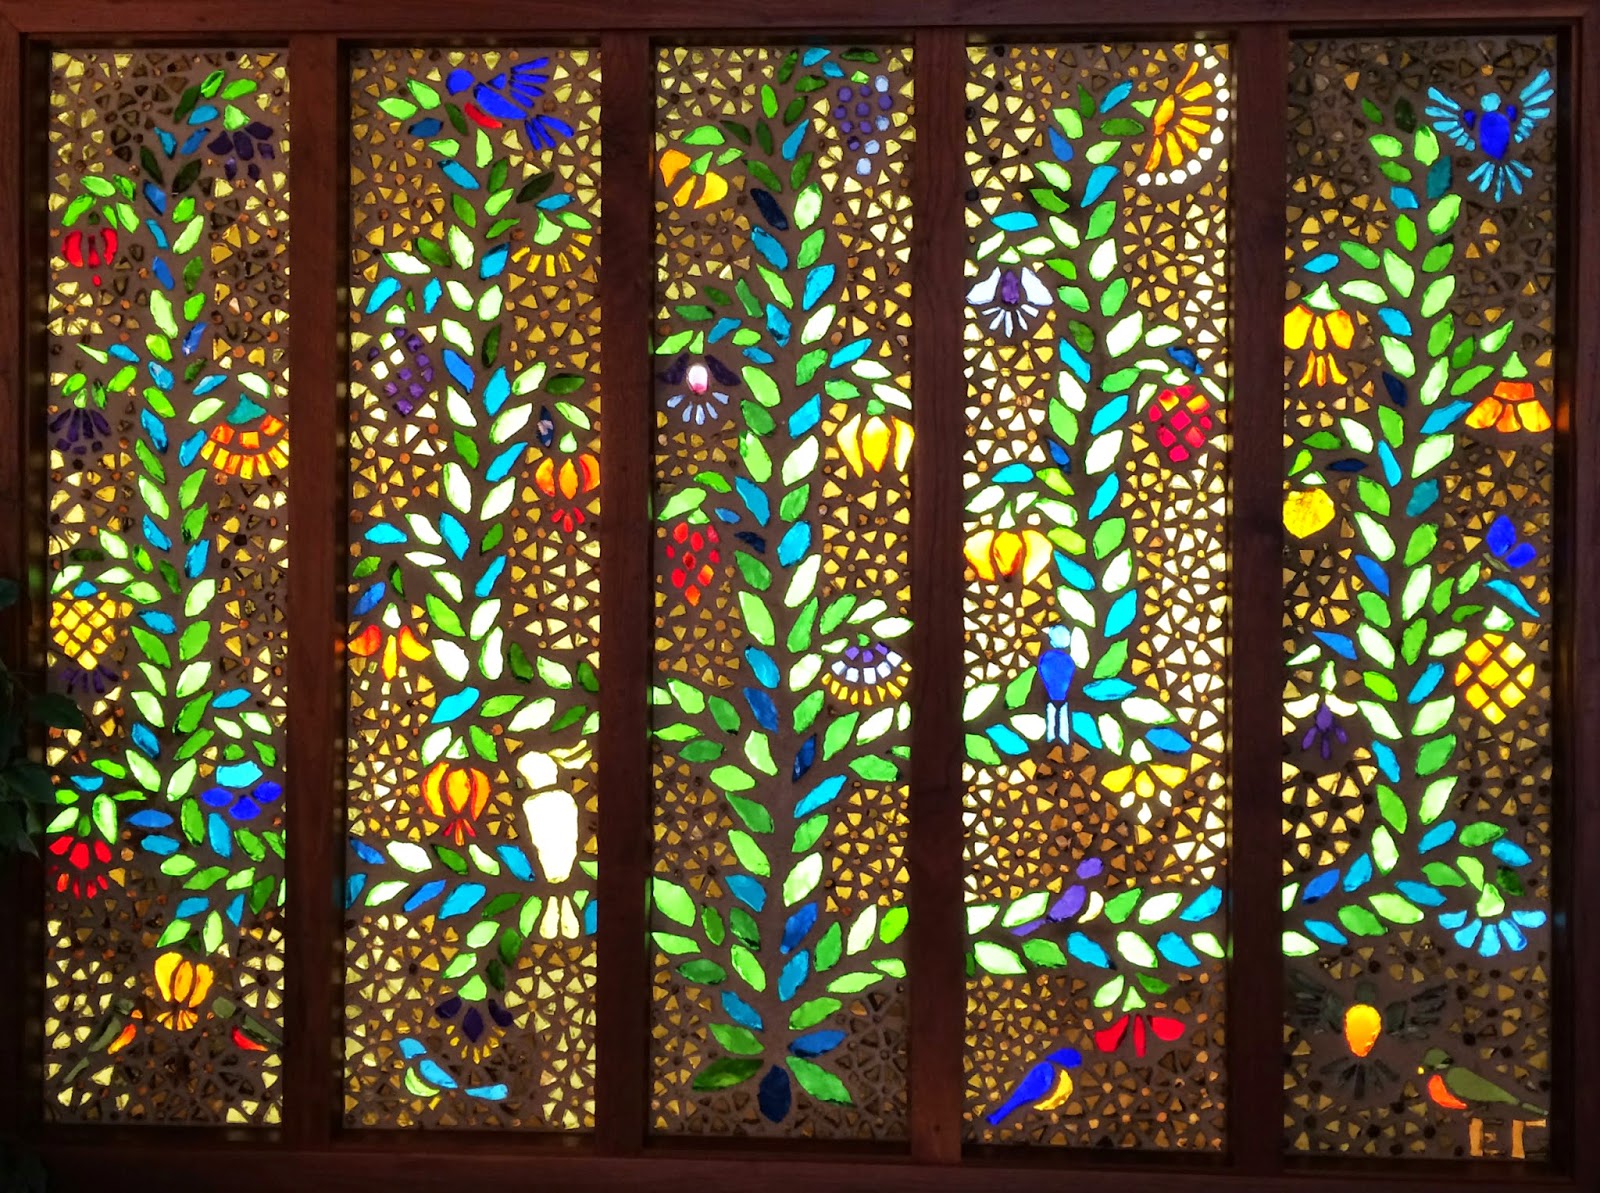 The Tree of Life Stained Glass by Fayetteville Native, Elizabeth Grafton